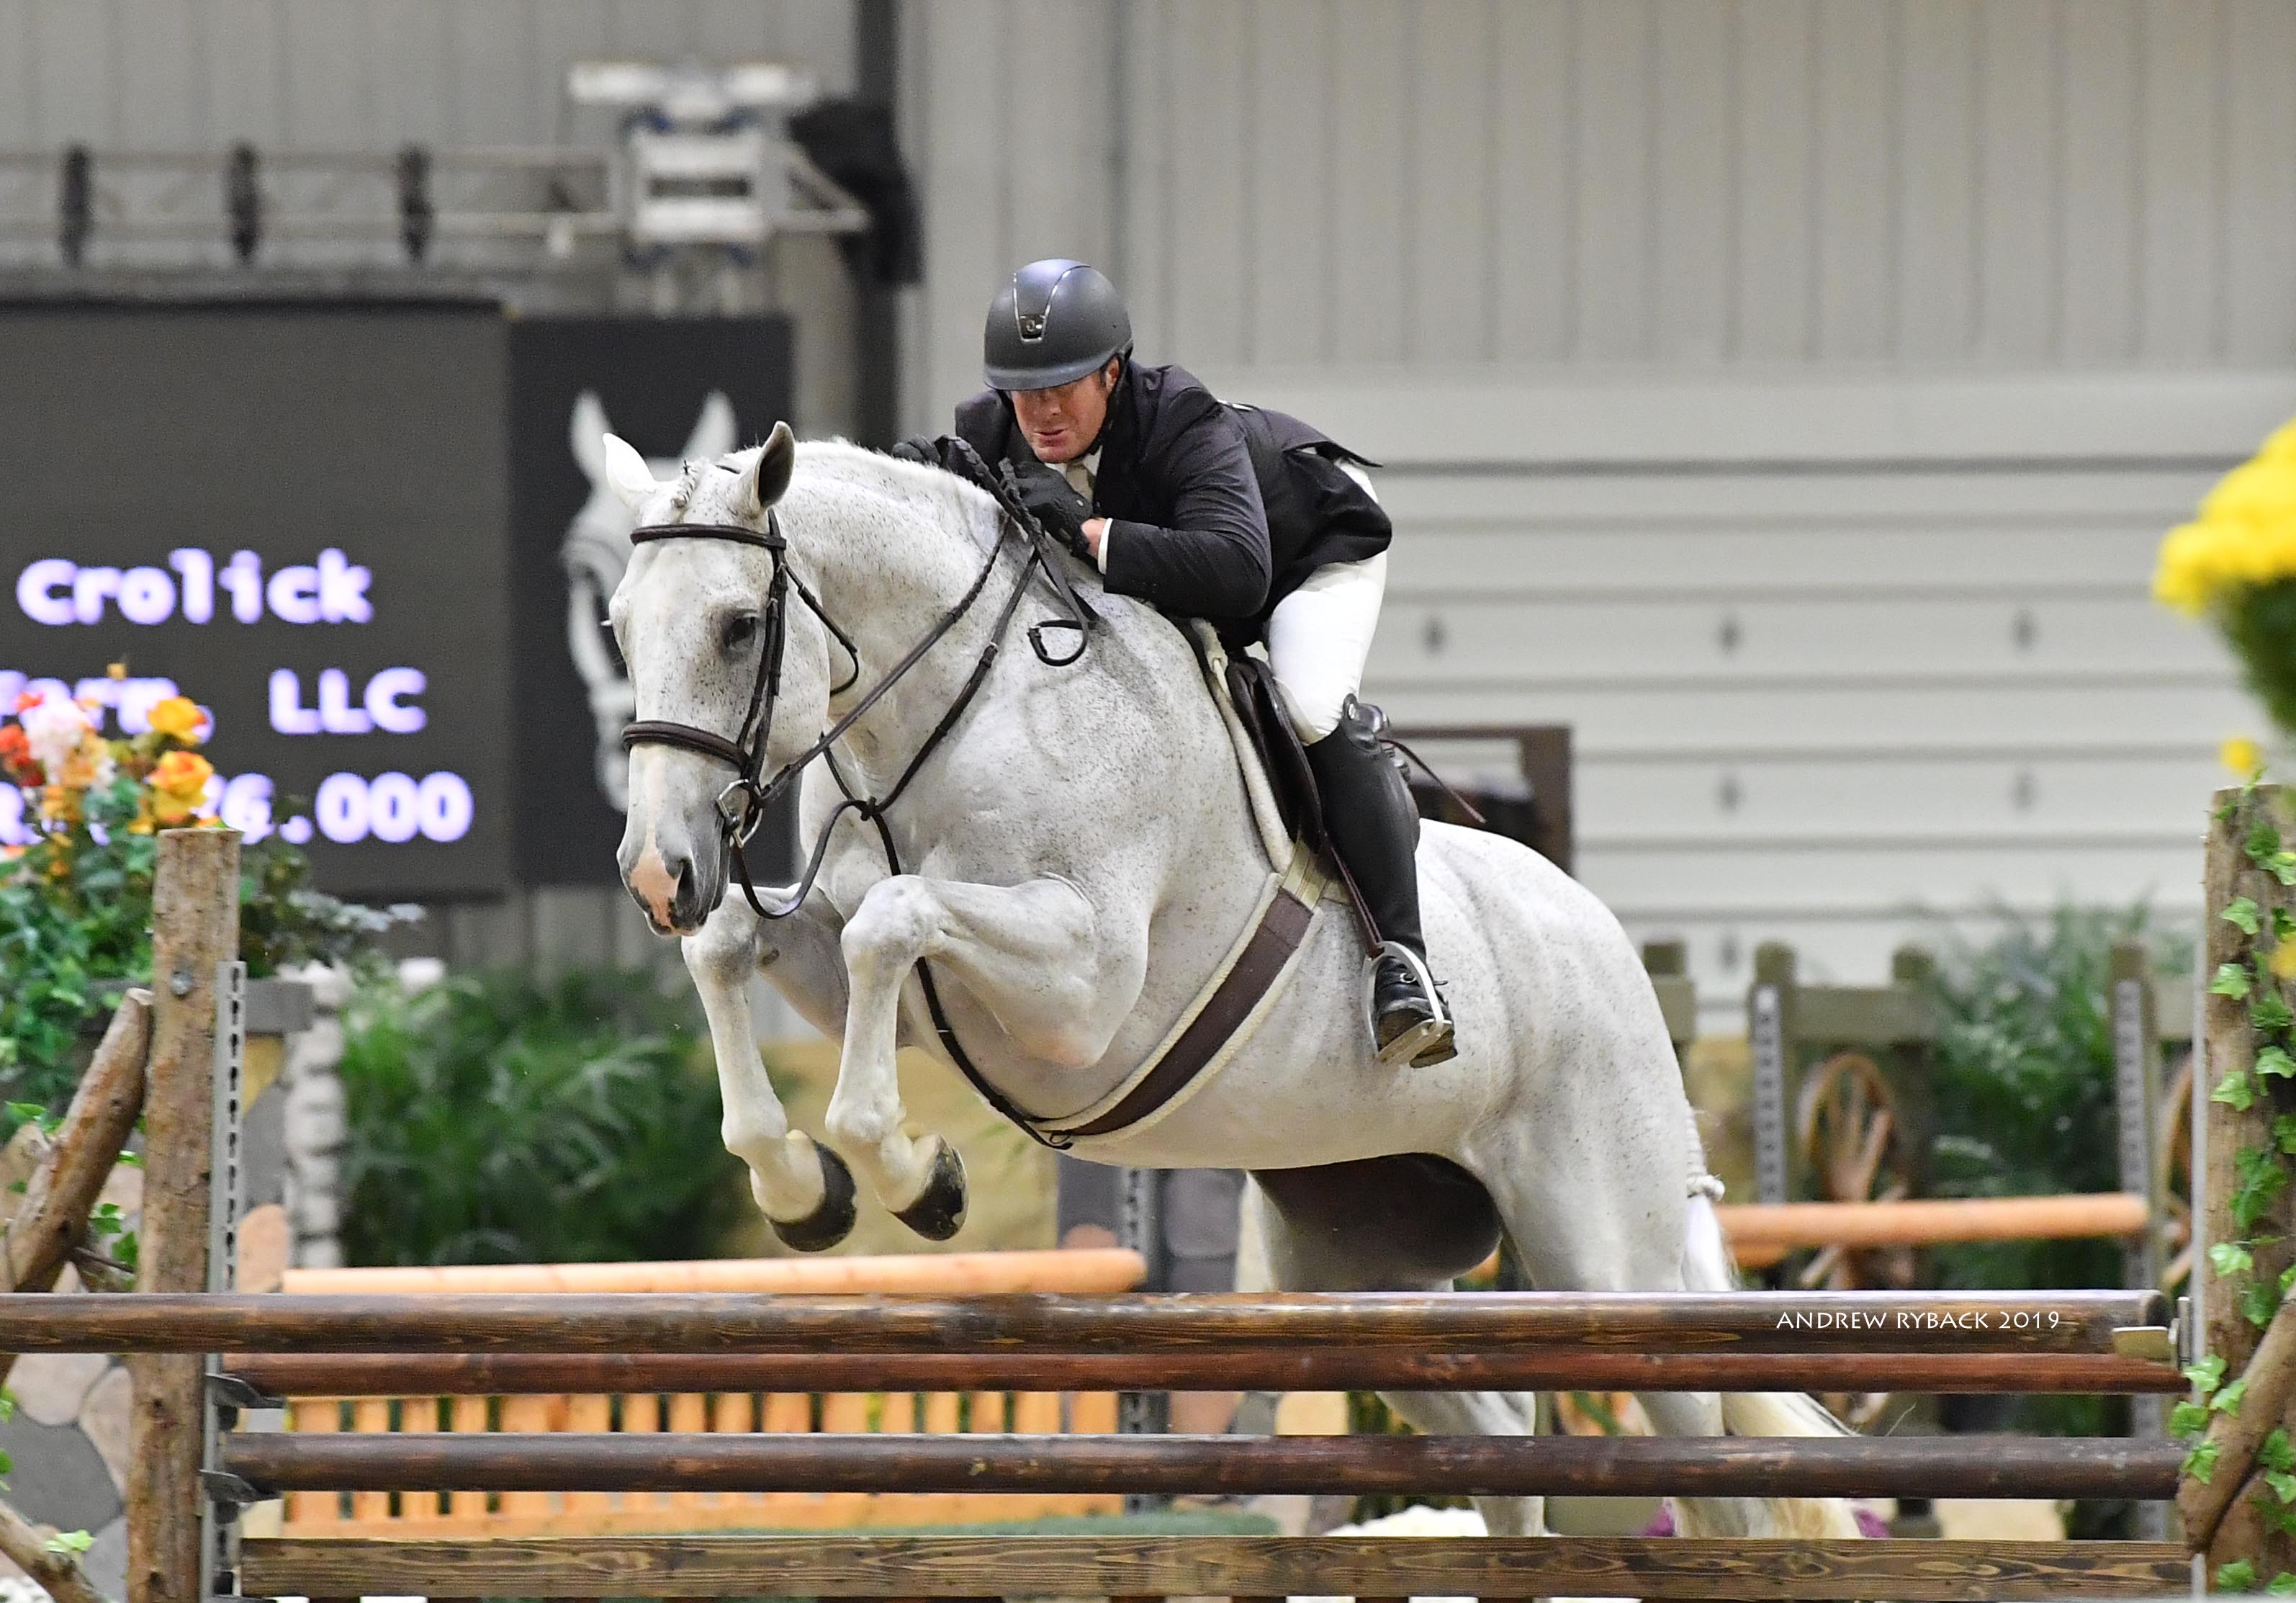 Greg Crolick and Corallo Z Take Top Honors in the $40,000 USHJA